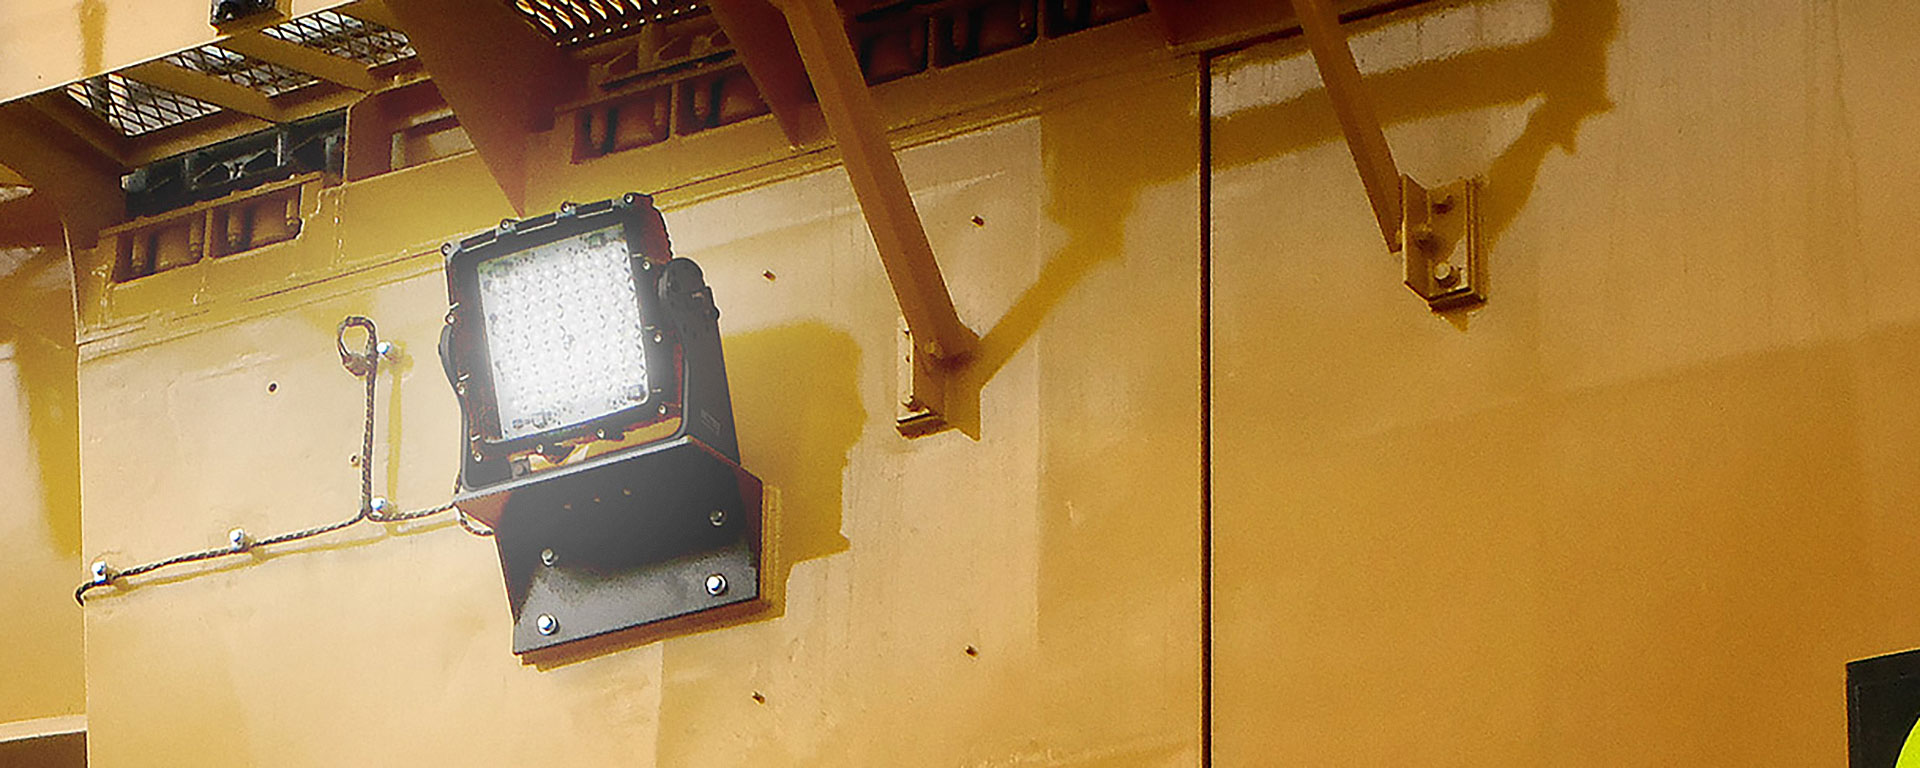 The CP56 LED mining floodlight in application, installed on a mobile plant